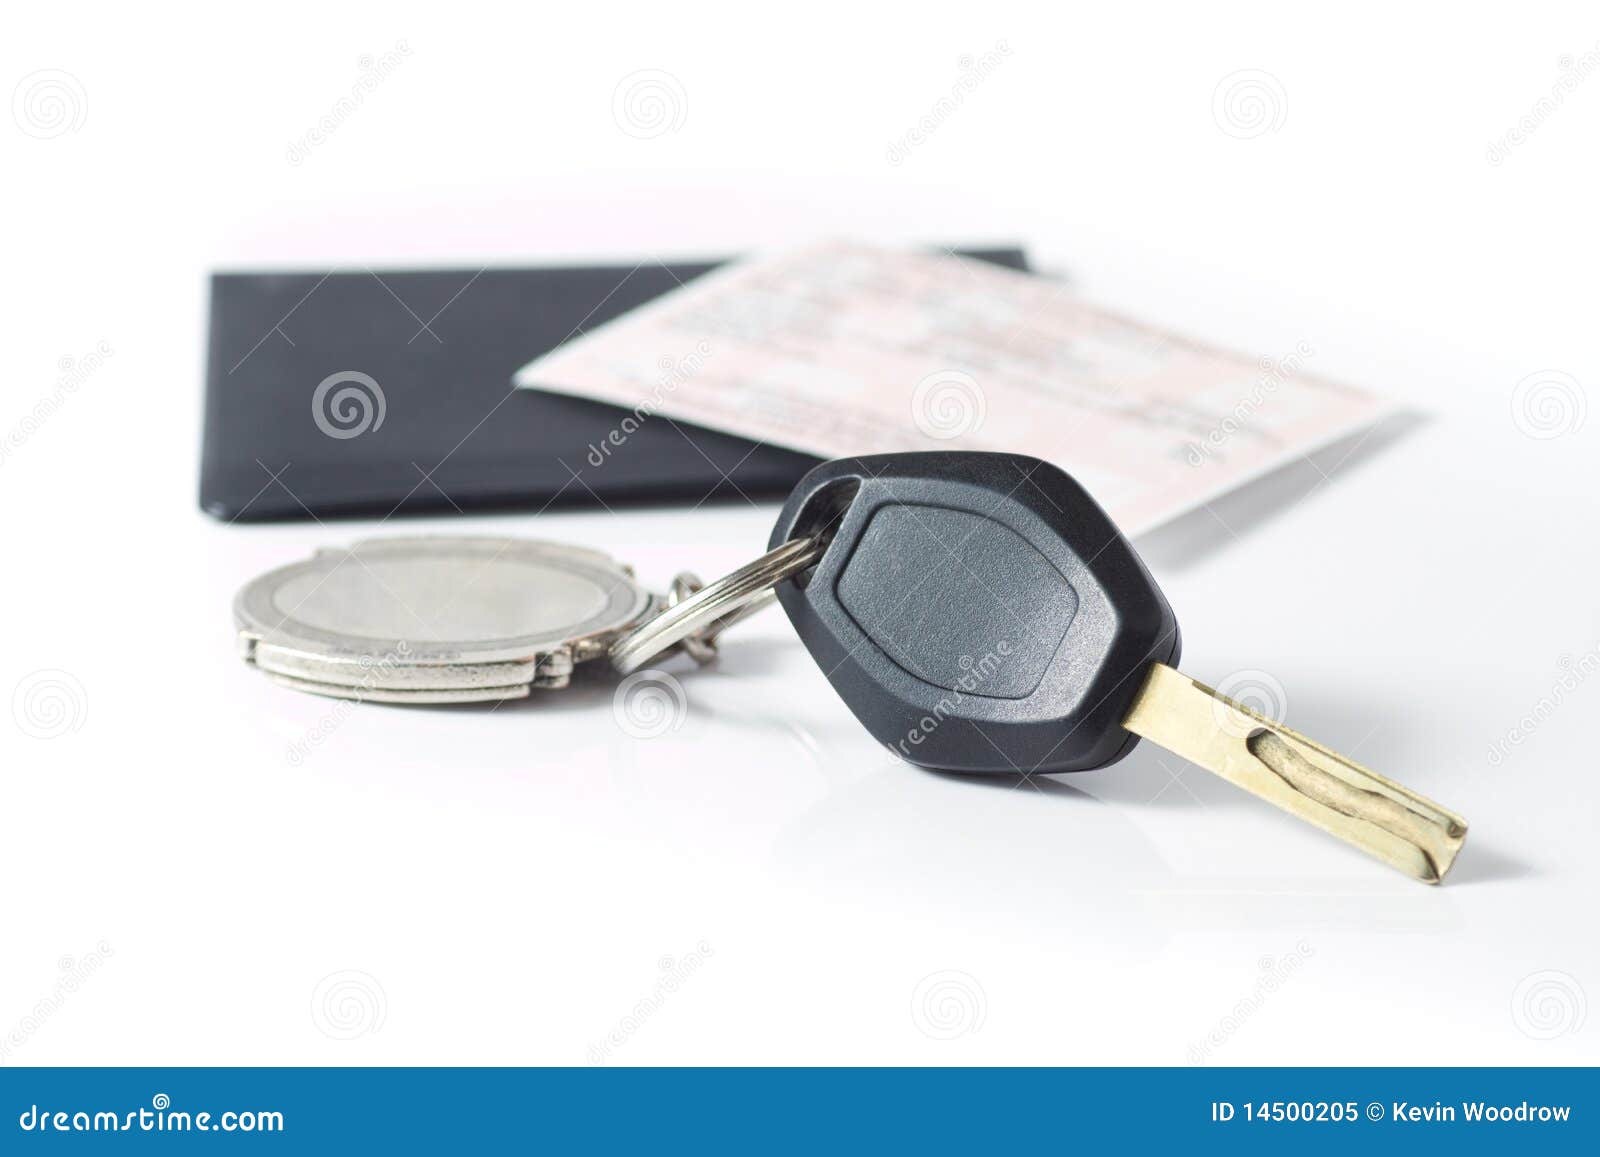 car keys with insurance paper behind on white